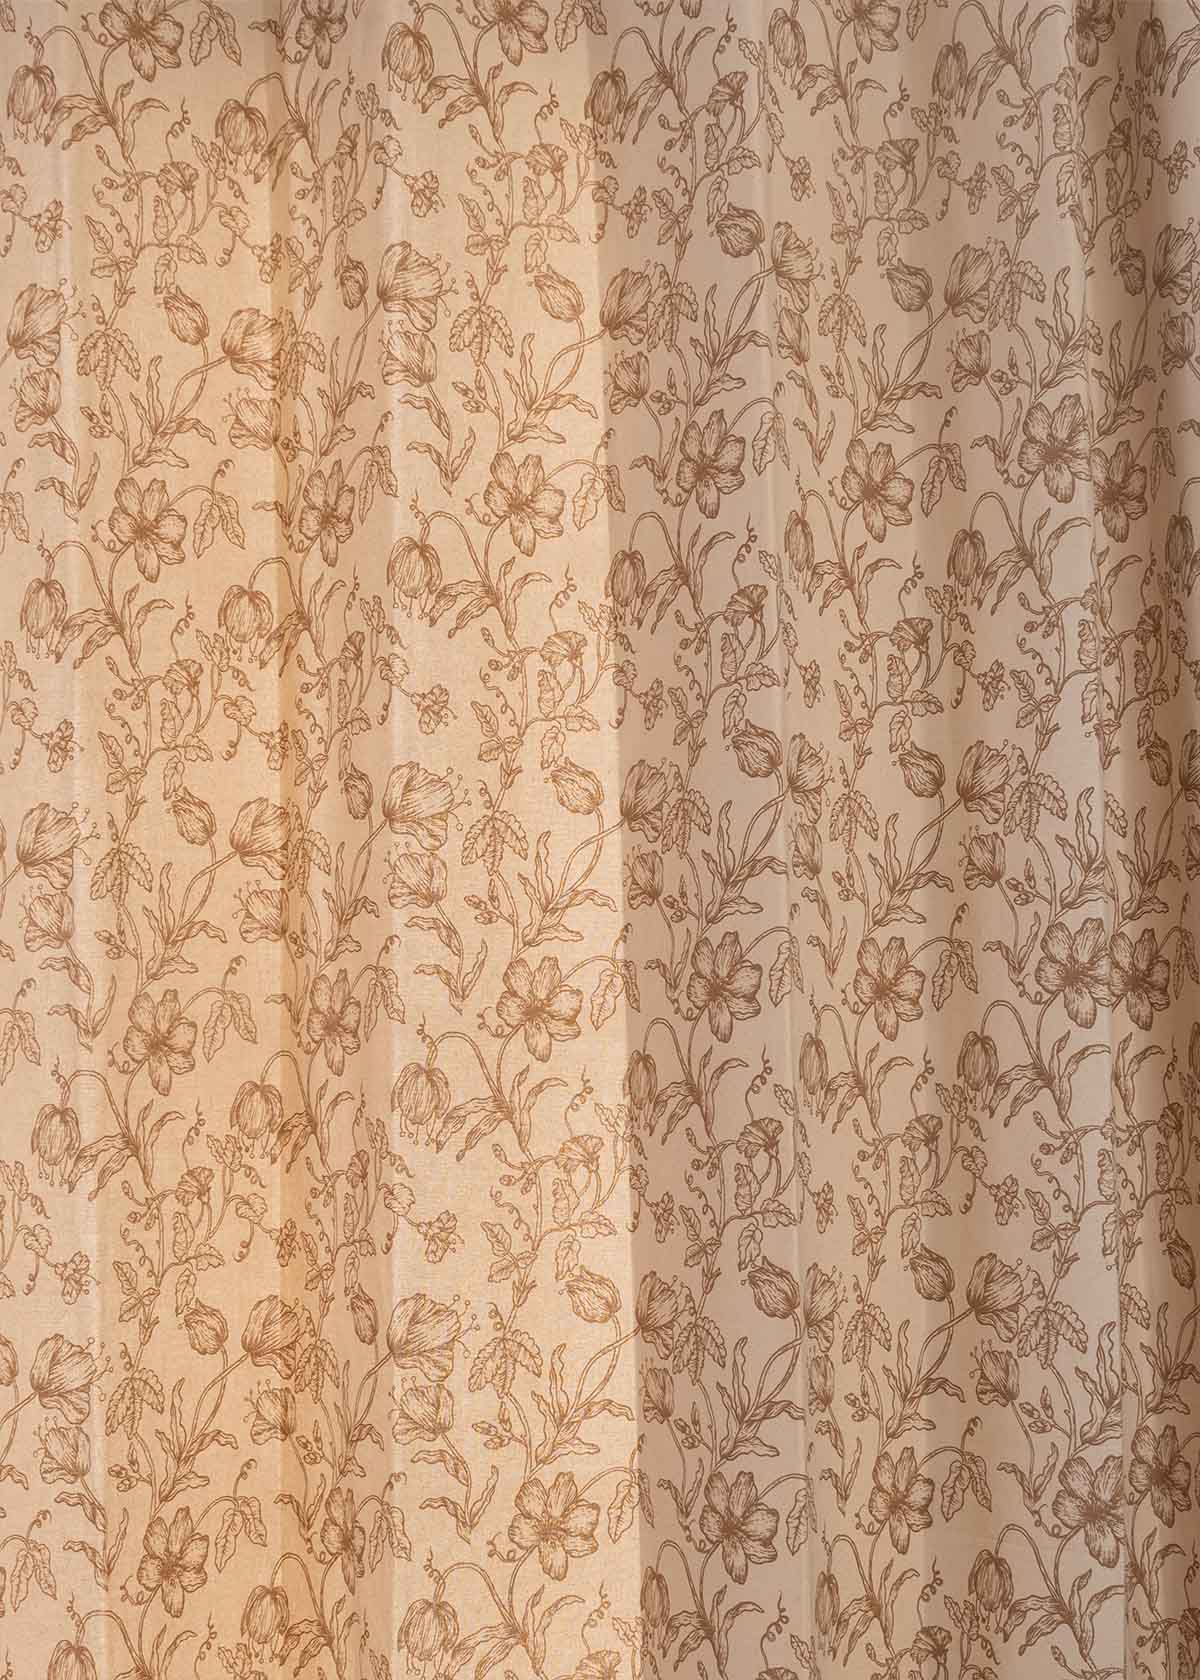 French Farmhouse 100% cotton floral curtain for living room - Room darkening - Beige - Pack of 1